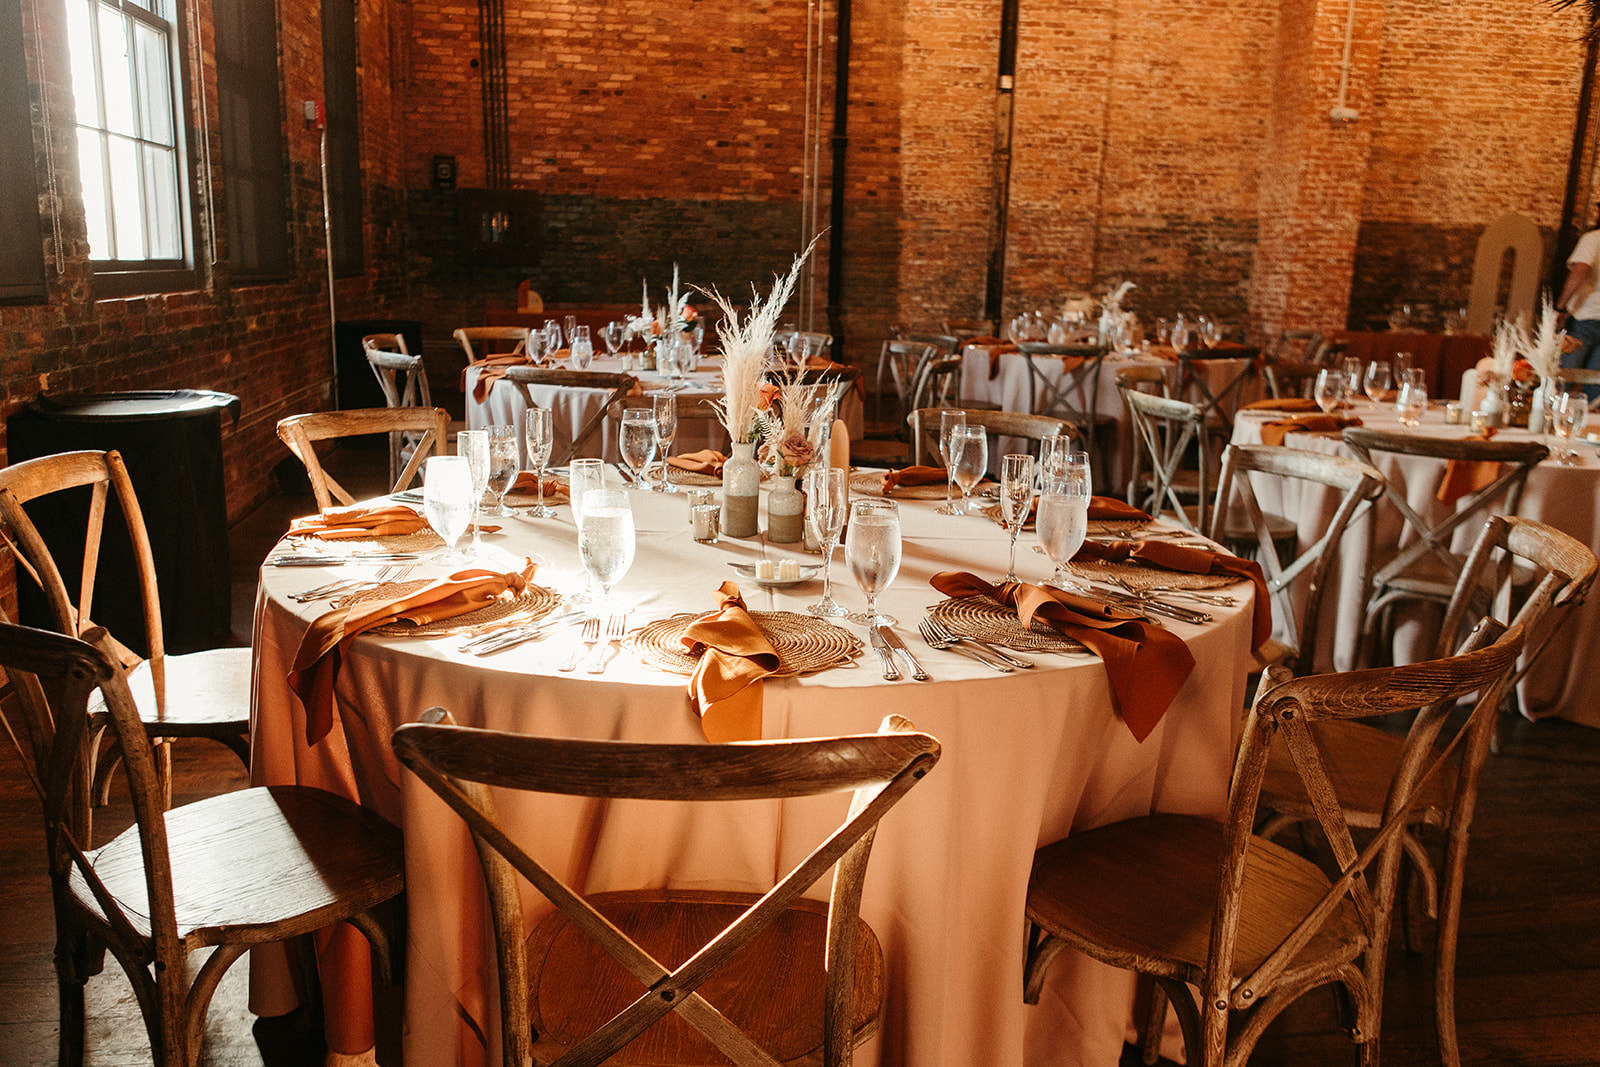 Earthy Neutral Boho Modern Chic Wedding Reception Decor, Round Tables with Terracotta Linens, Wooden Cross Back Chairs, Low Mix and Match Floral Pampas Grass Centerpiece | Tampa Bay Wedding Planner Wilder Mind Events | Wedding Venue Armature Works